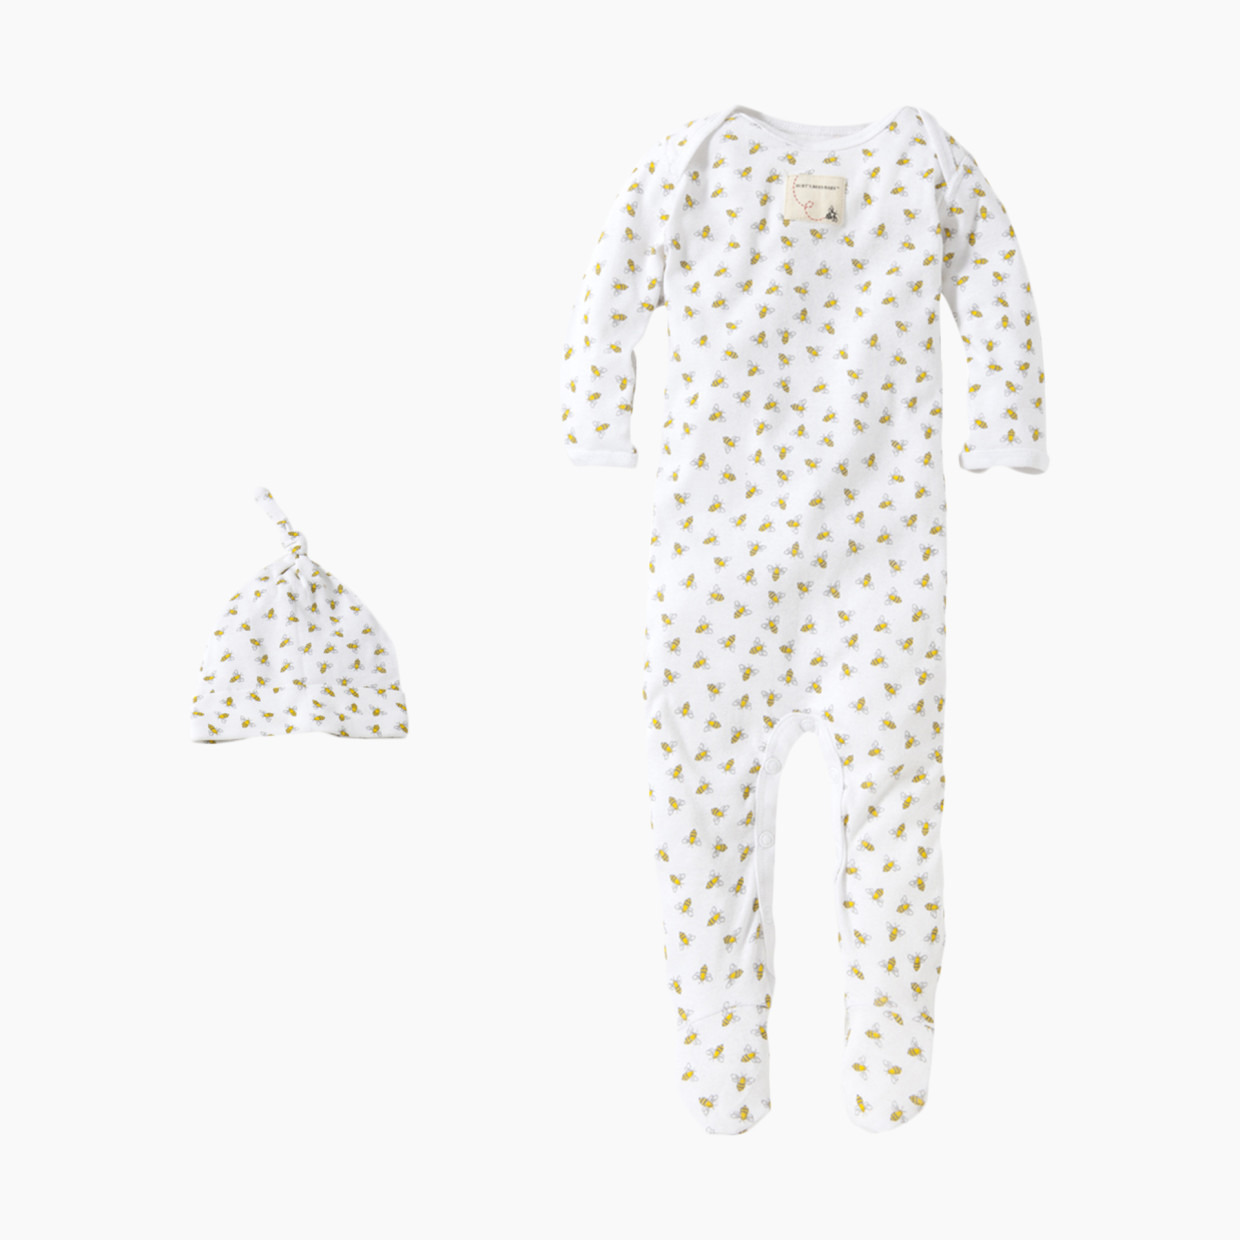 Burt's Bees Baby Organic Footed Coverall & Knot Top Hat - Cloud Honeybee, 3-6 Months.